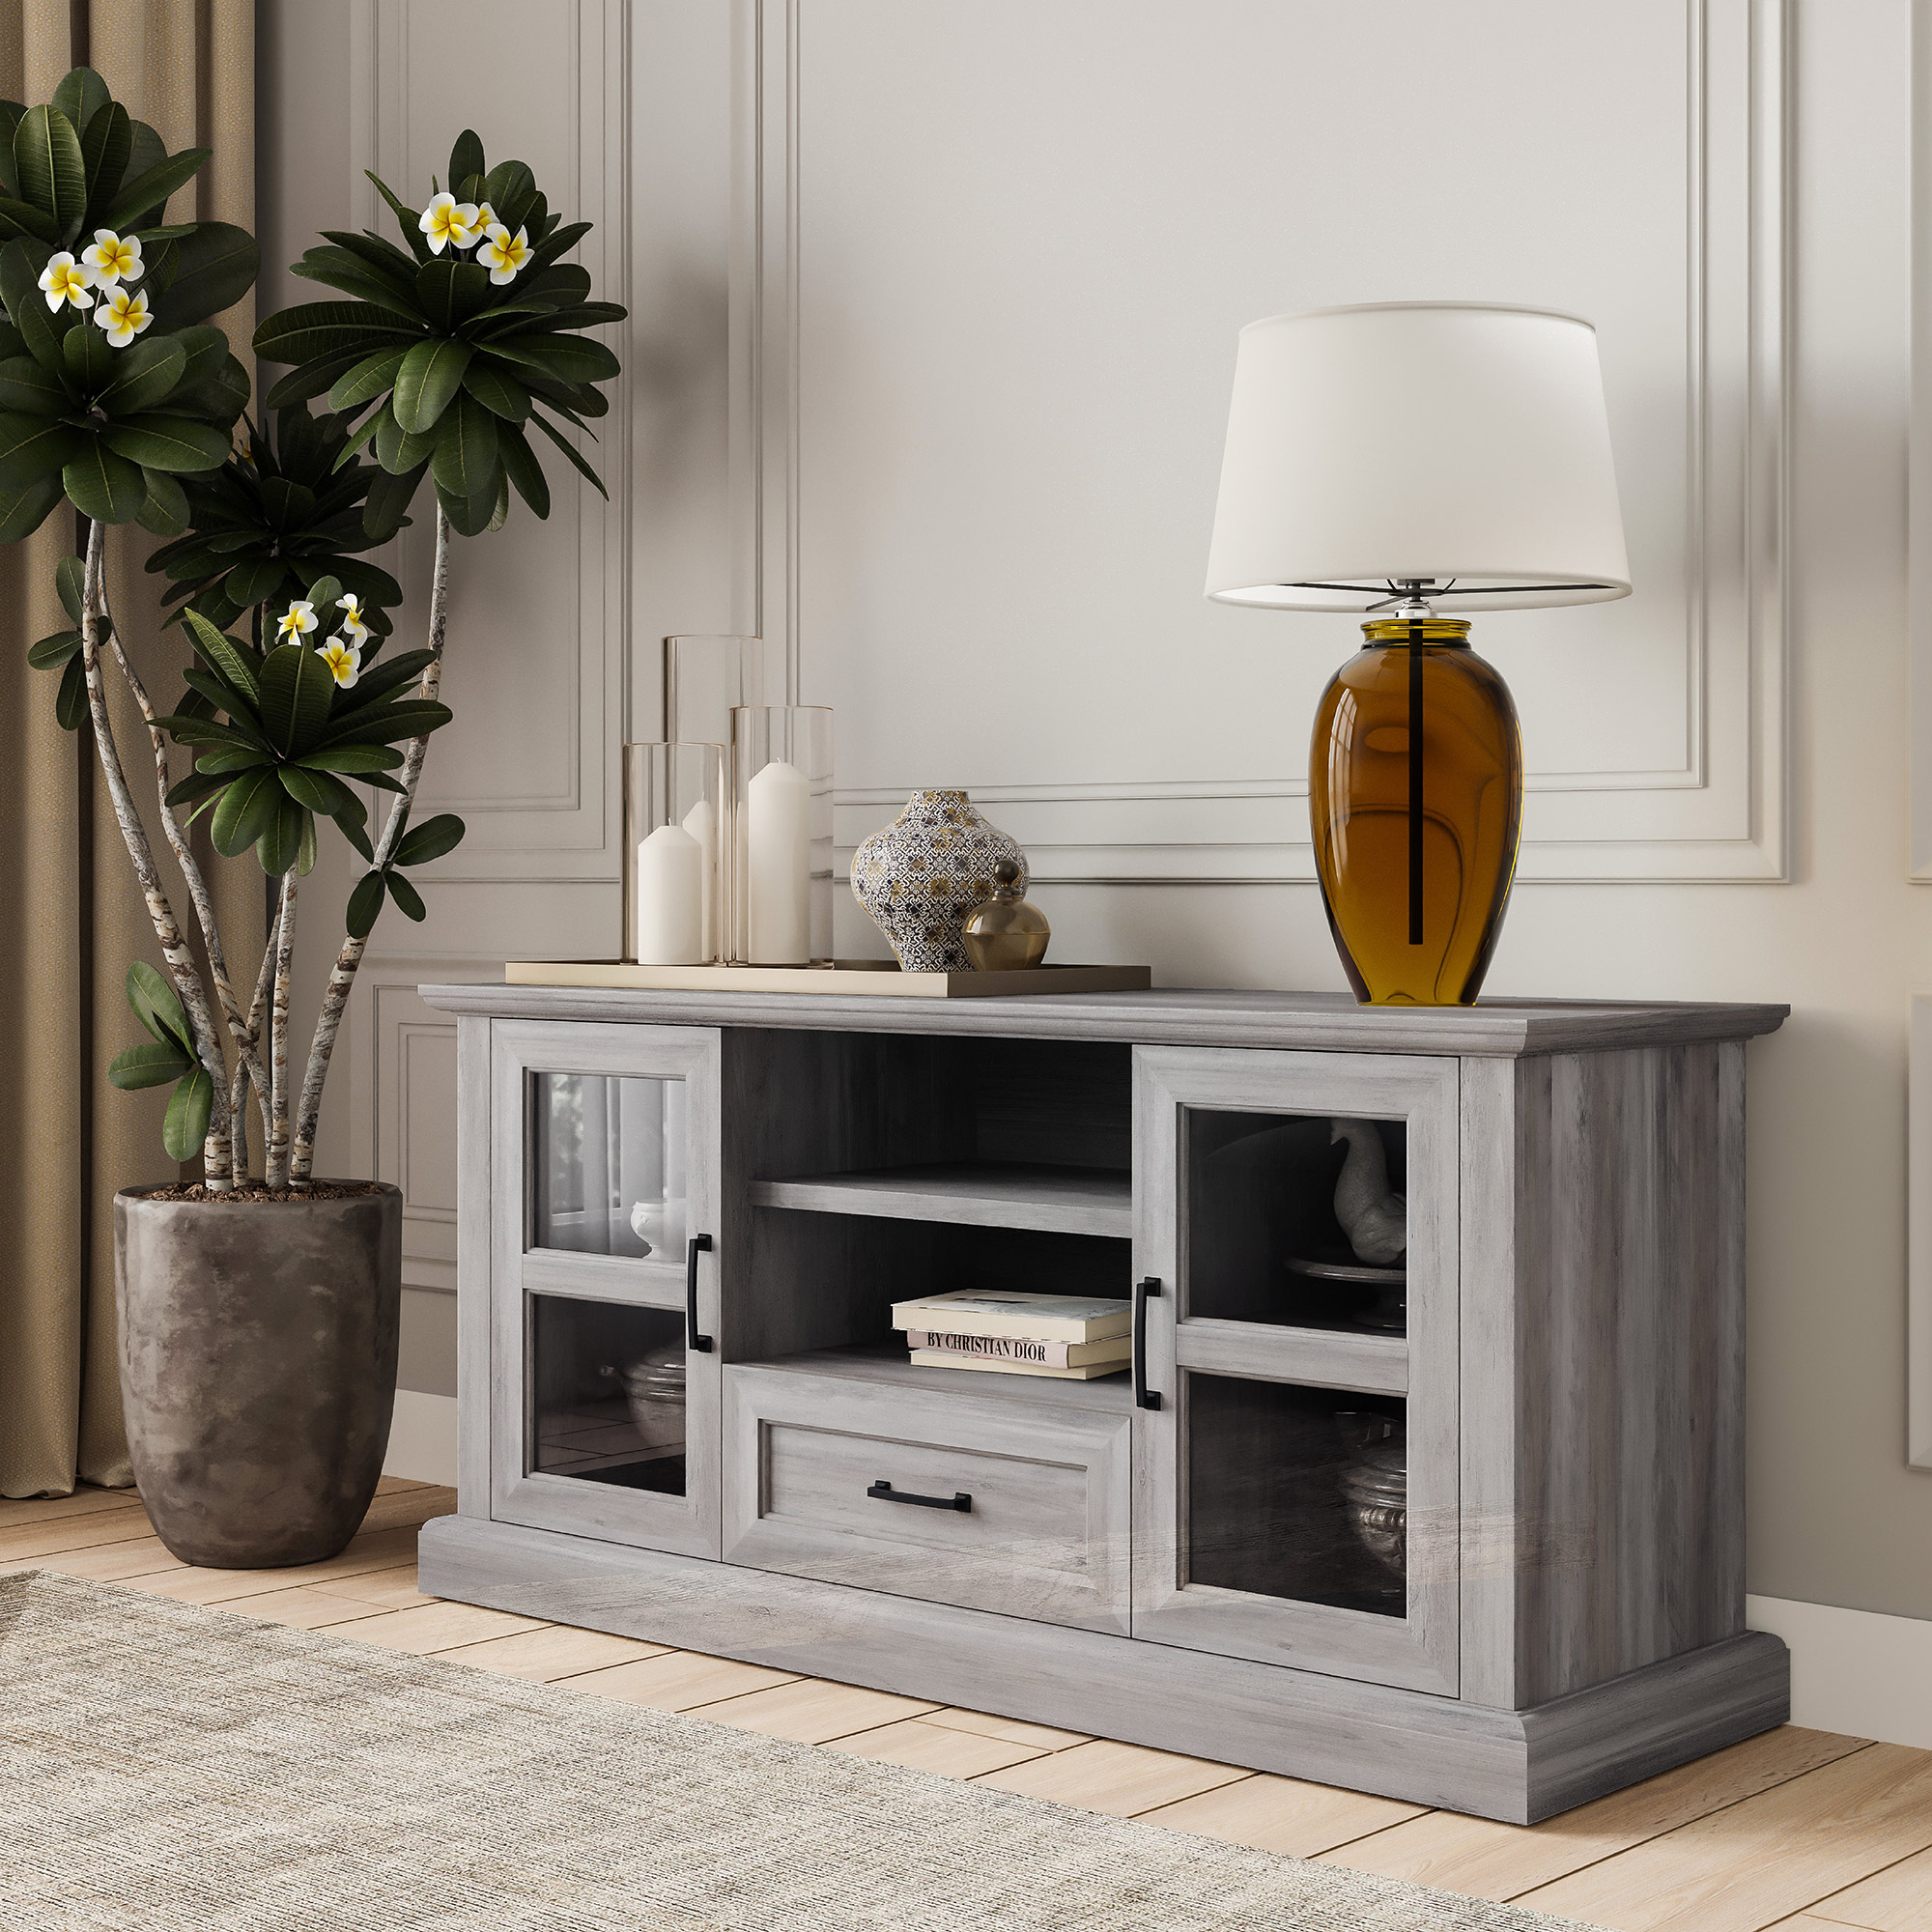 BELLEZE Rustic Modern TV Stand - Trussati (Gray Wash) - image 1 of 7